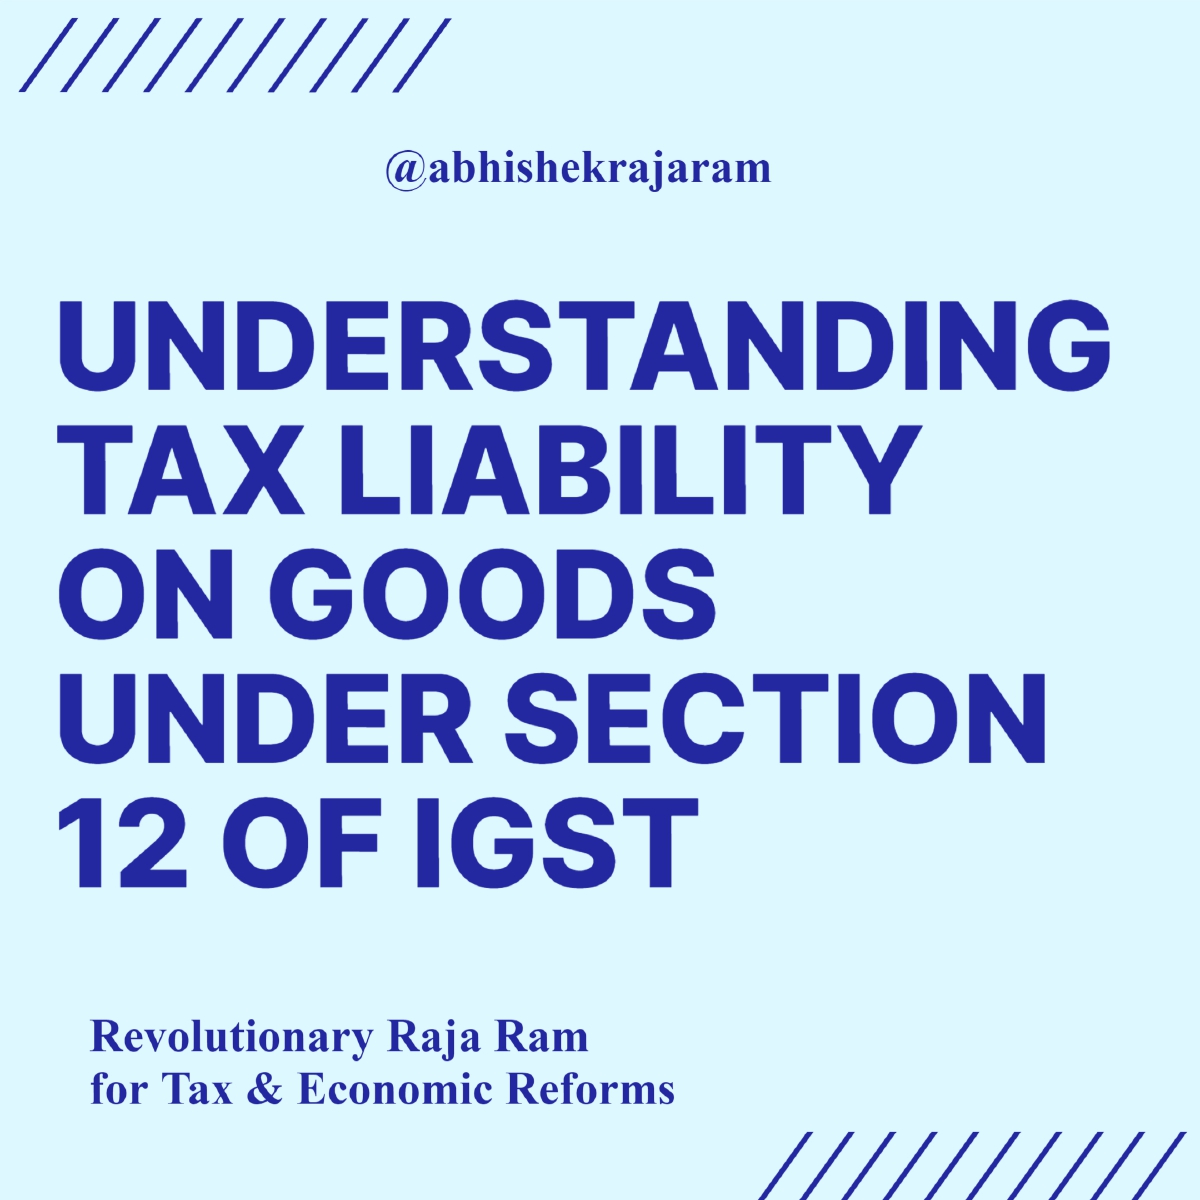 Section 12 of #IGST offers clear guidelines on when tax liability arises for goods in India. Understanding these criteria is essential for businesses to comply with GST regulations.

#GST #GoodsTax #TaxLiability #IndianTaxation